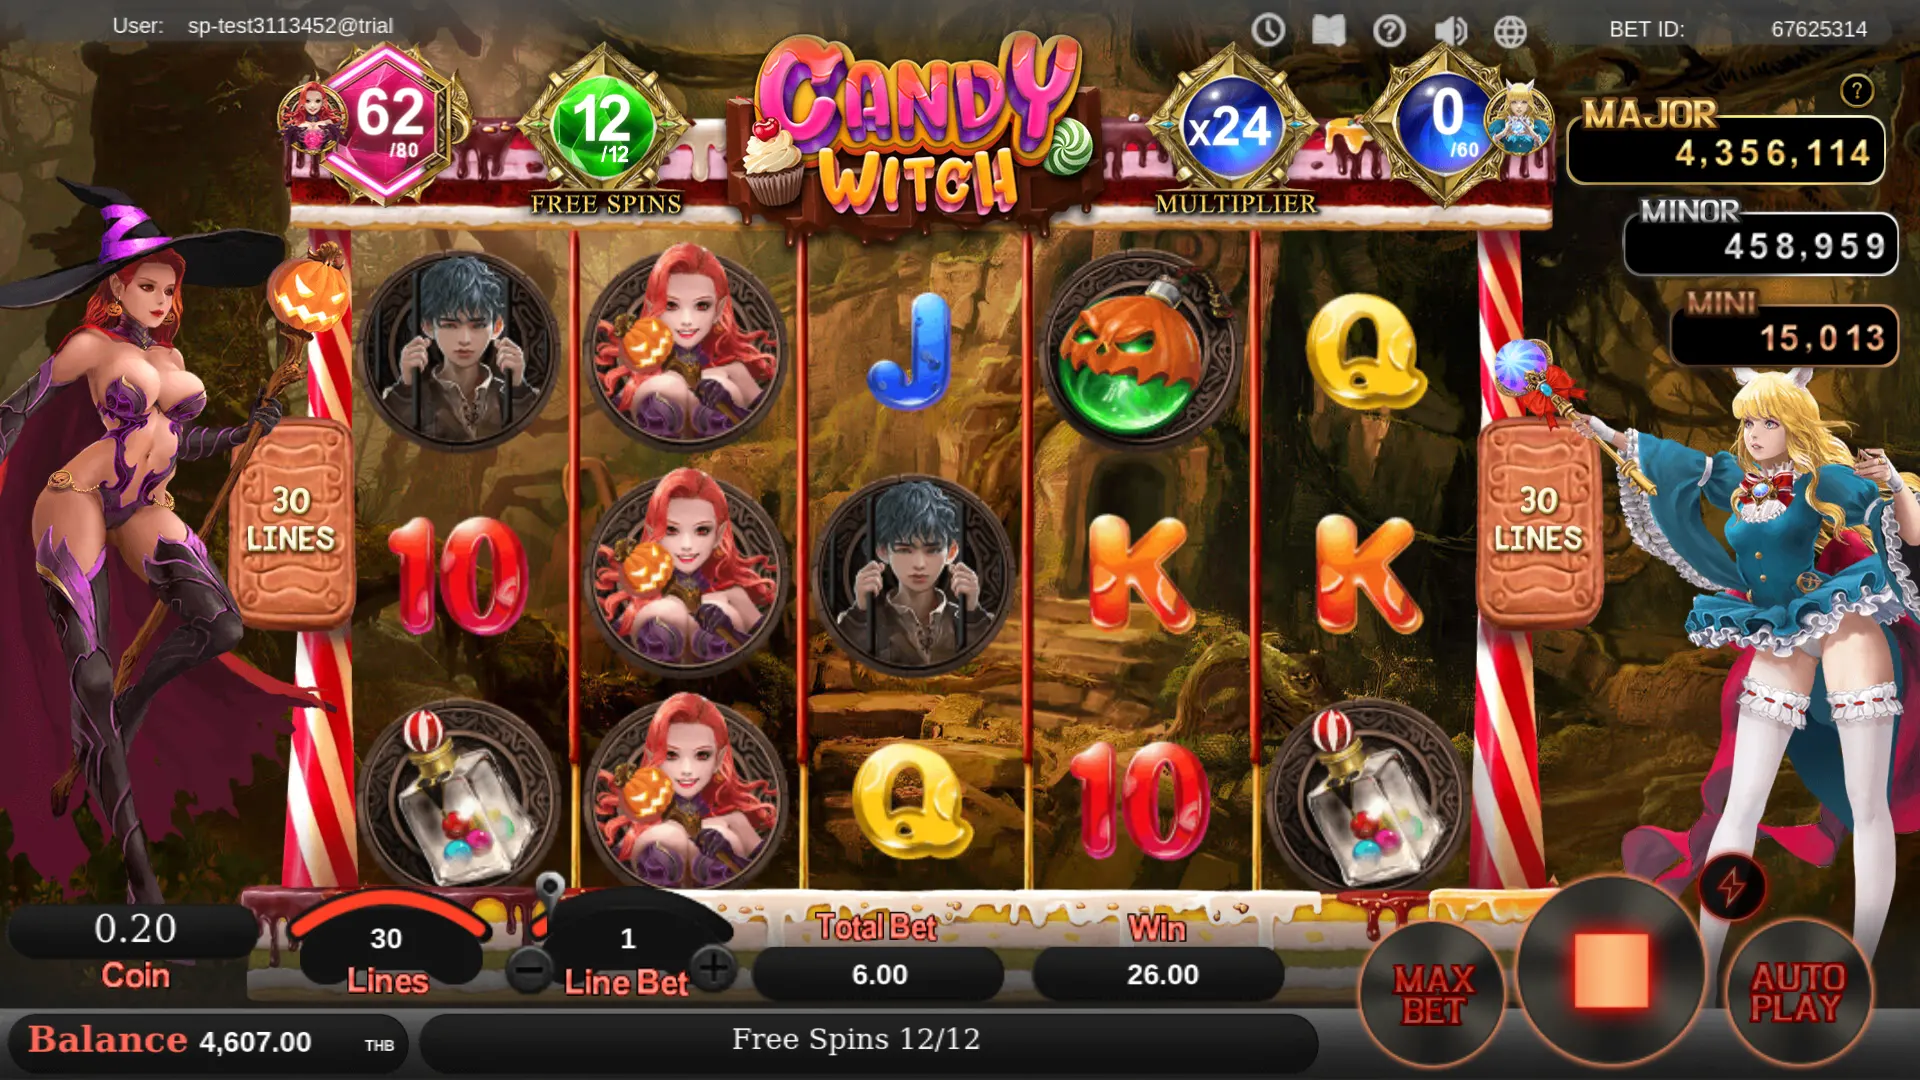 Candy Witch Free Spins